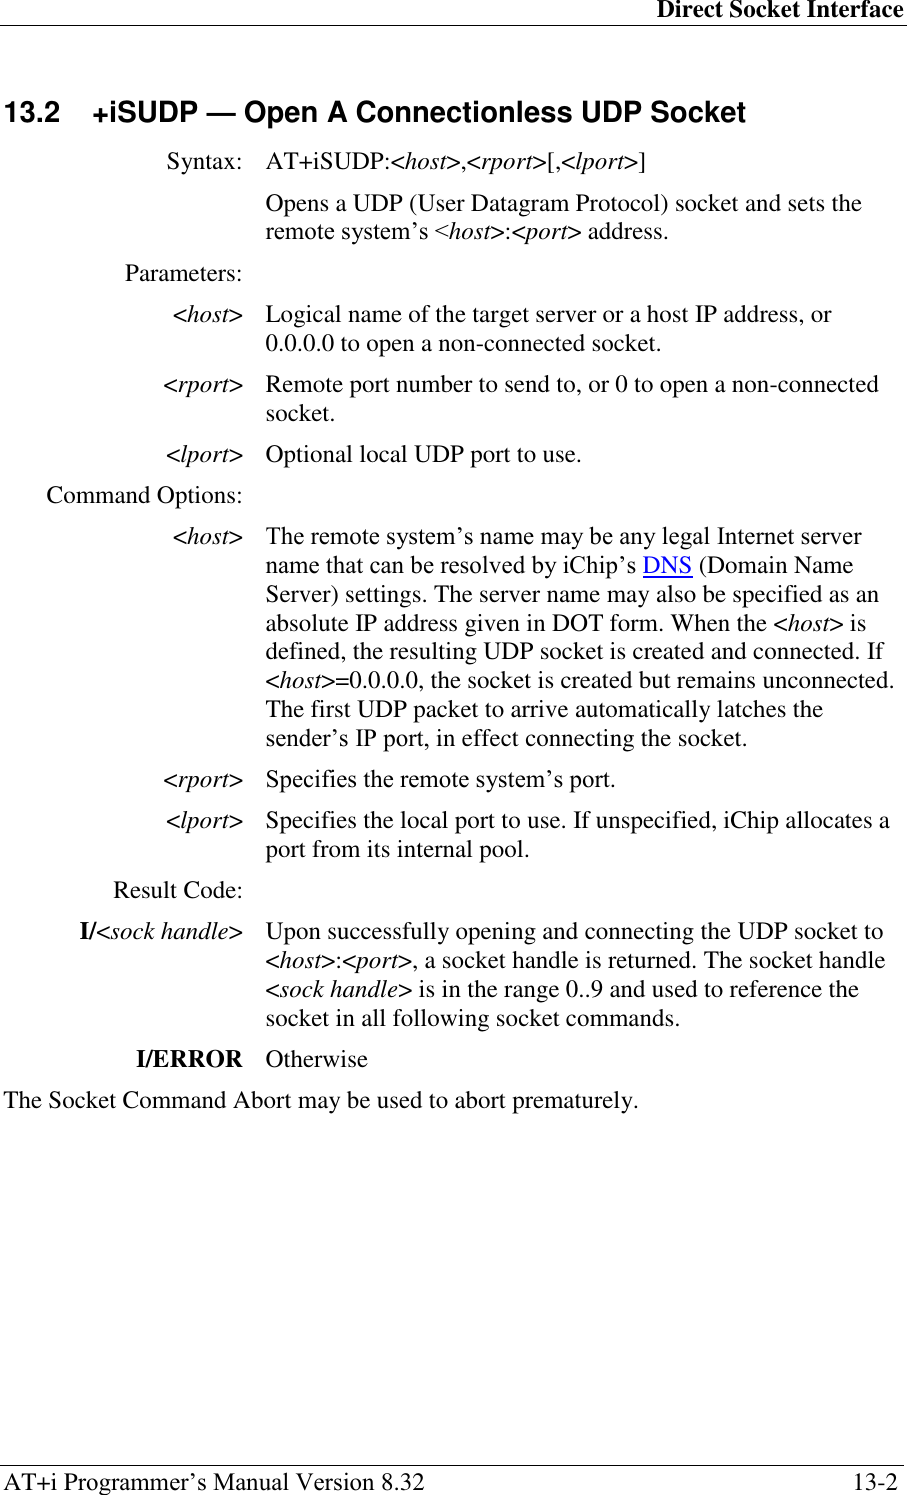 Direct Socket Interface AT+i Programmer‘s Manual Version 8.32  13-2 13.2  +iSUDP — Open A Connectionless UDP Socket  Syntax: AT+iSUDP:&lt;host&gt;,&lt;rport&gt;[,&lt;lport&gt;]  Opens a UDP (User Datagram Protocol) socket and sets the remote system‘s &lt;host&gt;:&lt;port&gt; address. Parameters:  &lt;host&gt; Logical name of the target server or a host IP address, or 0.0.0.0 to open a non-connected socket. &lt;rport&gt; Remote port number to send to, or 0 to open a non-connected socket. &lt;lport&gt; Optional local UDP port to use. Command Options:  &lt;host&gt; The remote system‘s name may be any legal Internet server name that can be resolved by iChip‘s DNS (Domain Name Server) settings. The server name may also be specified as an absolute IP address given in DOT form. When the &lt;host&gt; is defined, the resulting UDP socket is created and connected. If &lt;host&gt;=0.0.0.0, the socket is created but remains unconnected. The first UDP packet to arrive automatically latches the sender‘s IP port, in effect connecting the socket. &lt;rport&gt; Specifies the remote system‘s port. &lt;lport&gt; Specifies the local port to use. If unspecified, iChip allocates a port from its internal pool. Result Code:  I/&lt;sock handle&gt; Upon successfully opening and connecting the UDP socket to &lt;host&gt;:&lt;port&gt;, a socket handle is returned. The socket handle &lt;sock handle&gt; is in the range 0..9 and used to reference the socket in all following socket commands. I/ERROR Otherwise The Socket Command Abort may be used to abort prematurely. 